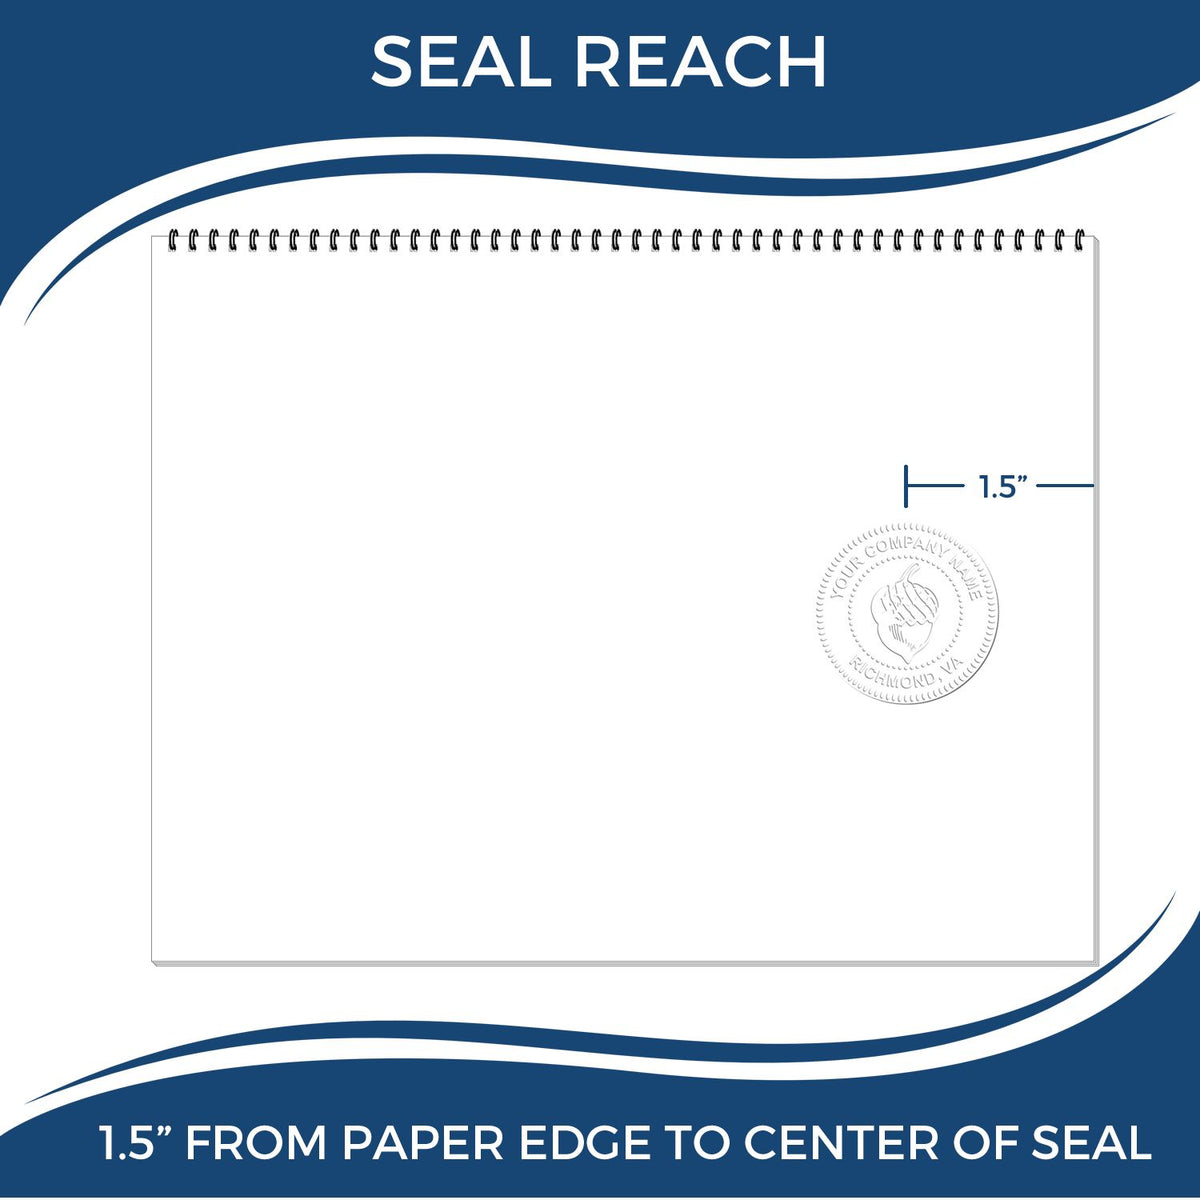 An infographic showing the seal reach which is represented by a ruler and a miniature seal image of the State of Oklahoma Architectural Seal Embosser